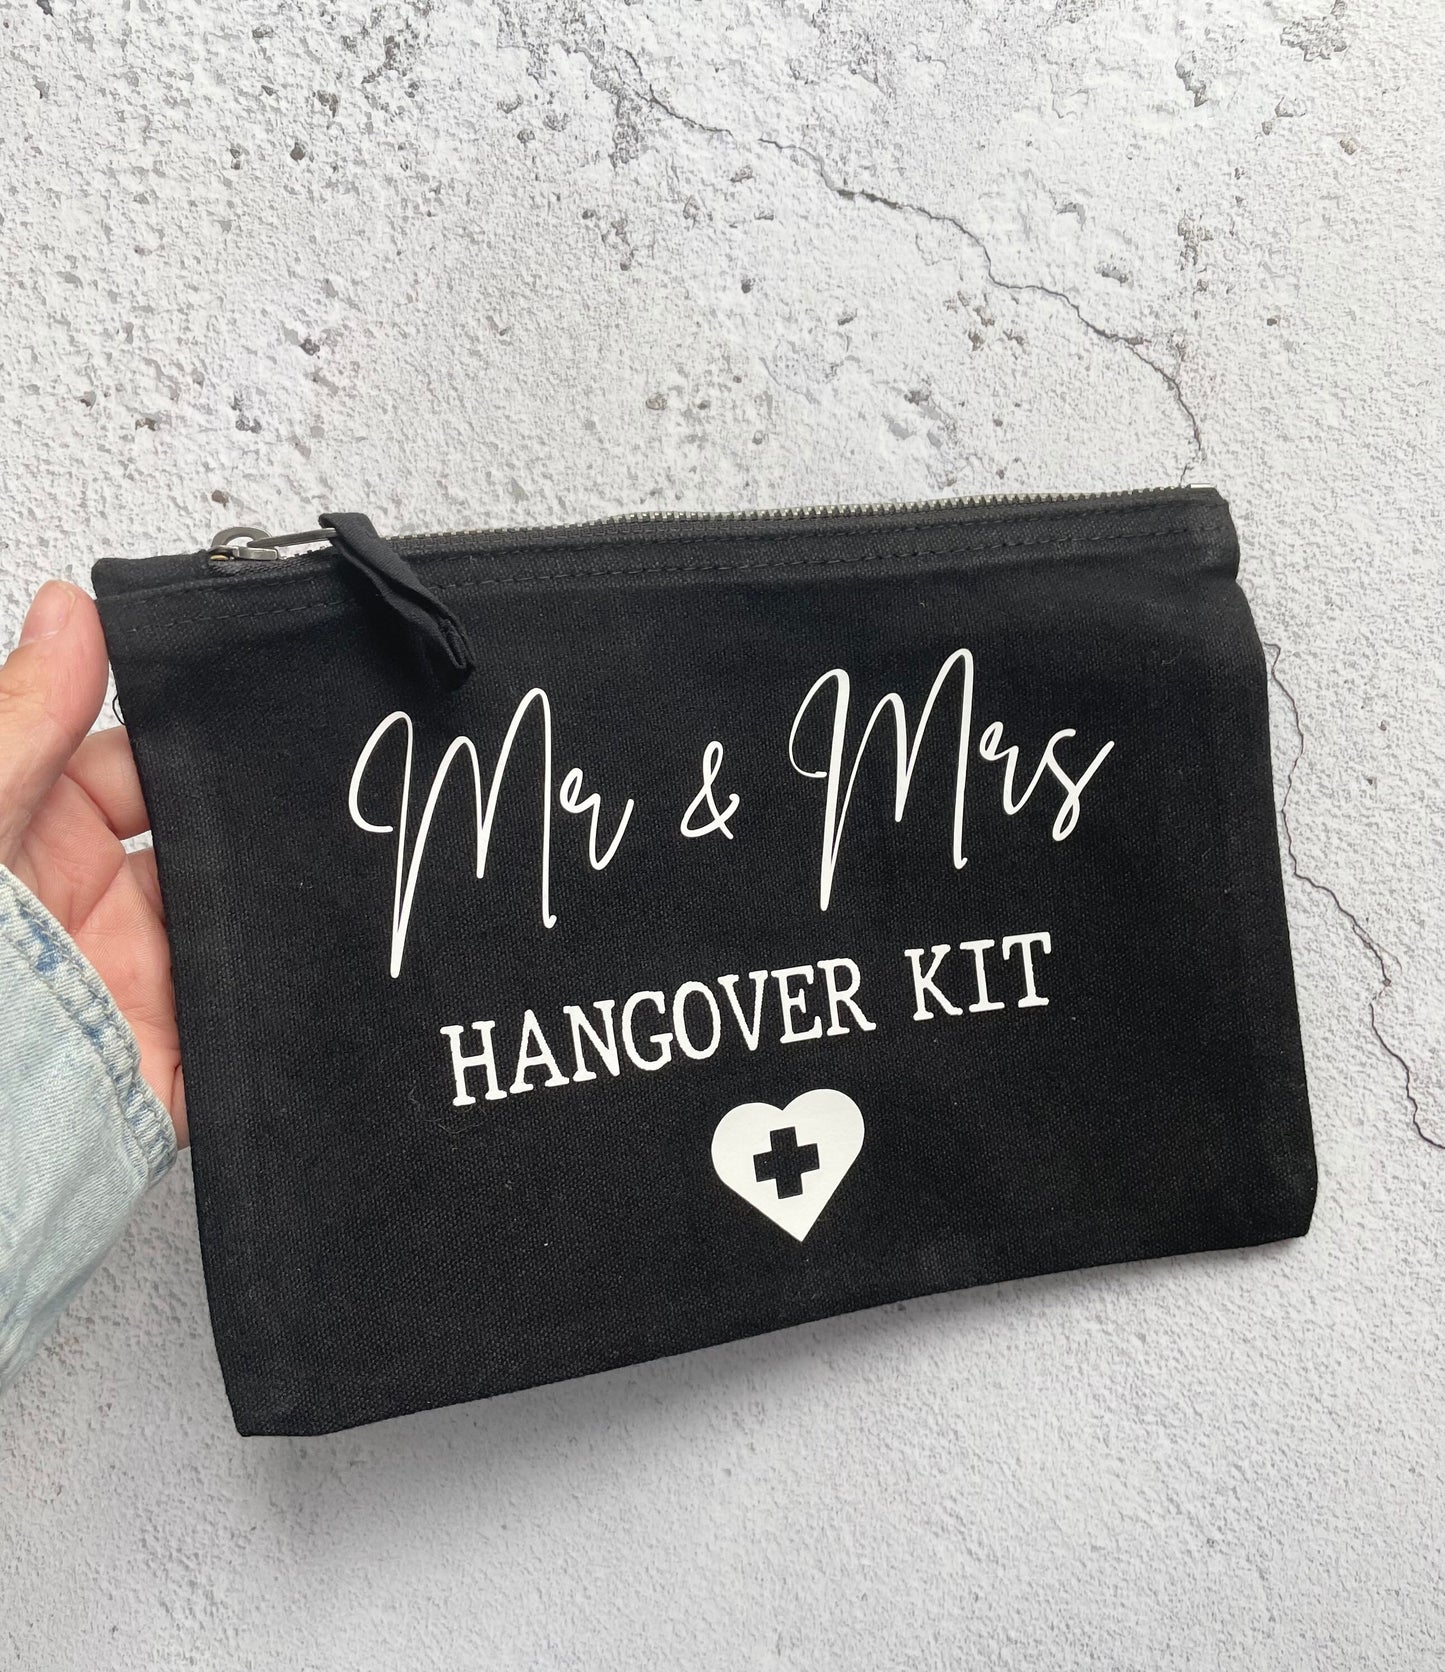 Mr & Mrs Hangover kit, newlyweds hangover pouch, morning after the wedding gift for bride and groom for wedding day hangover